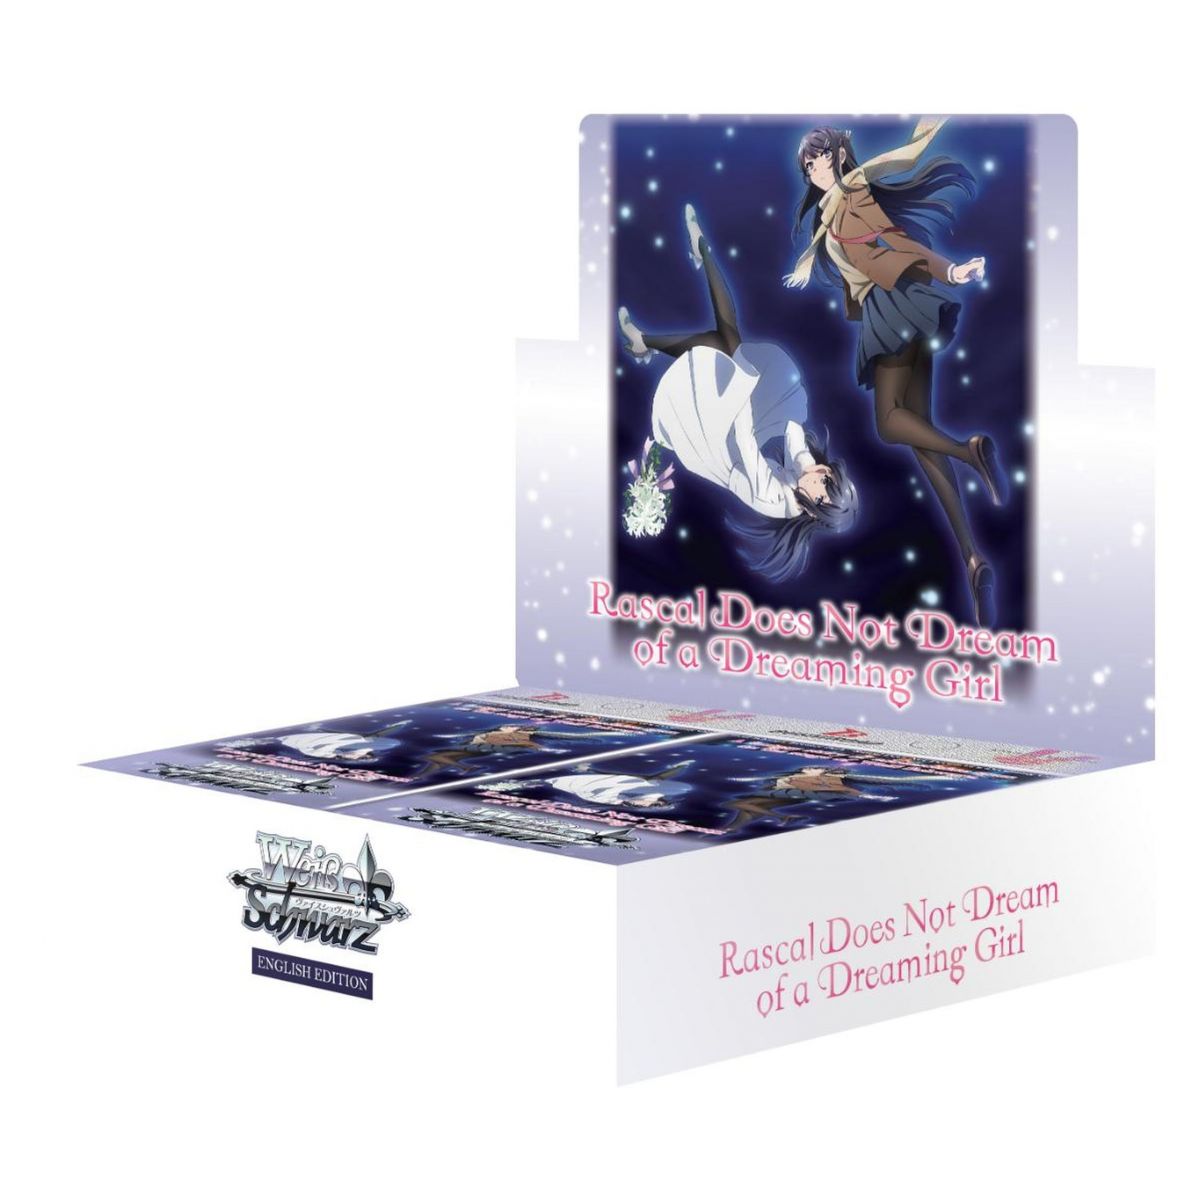 Weiss Schwarz - Display - Boite de 16 Boosters - Rascal Does Not Dream of a Dreaming Girl - EN - 1st Edition